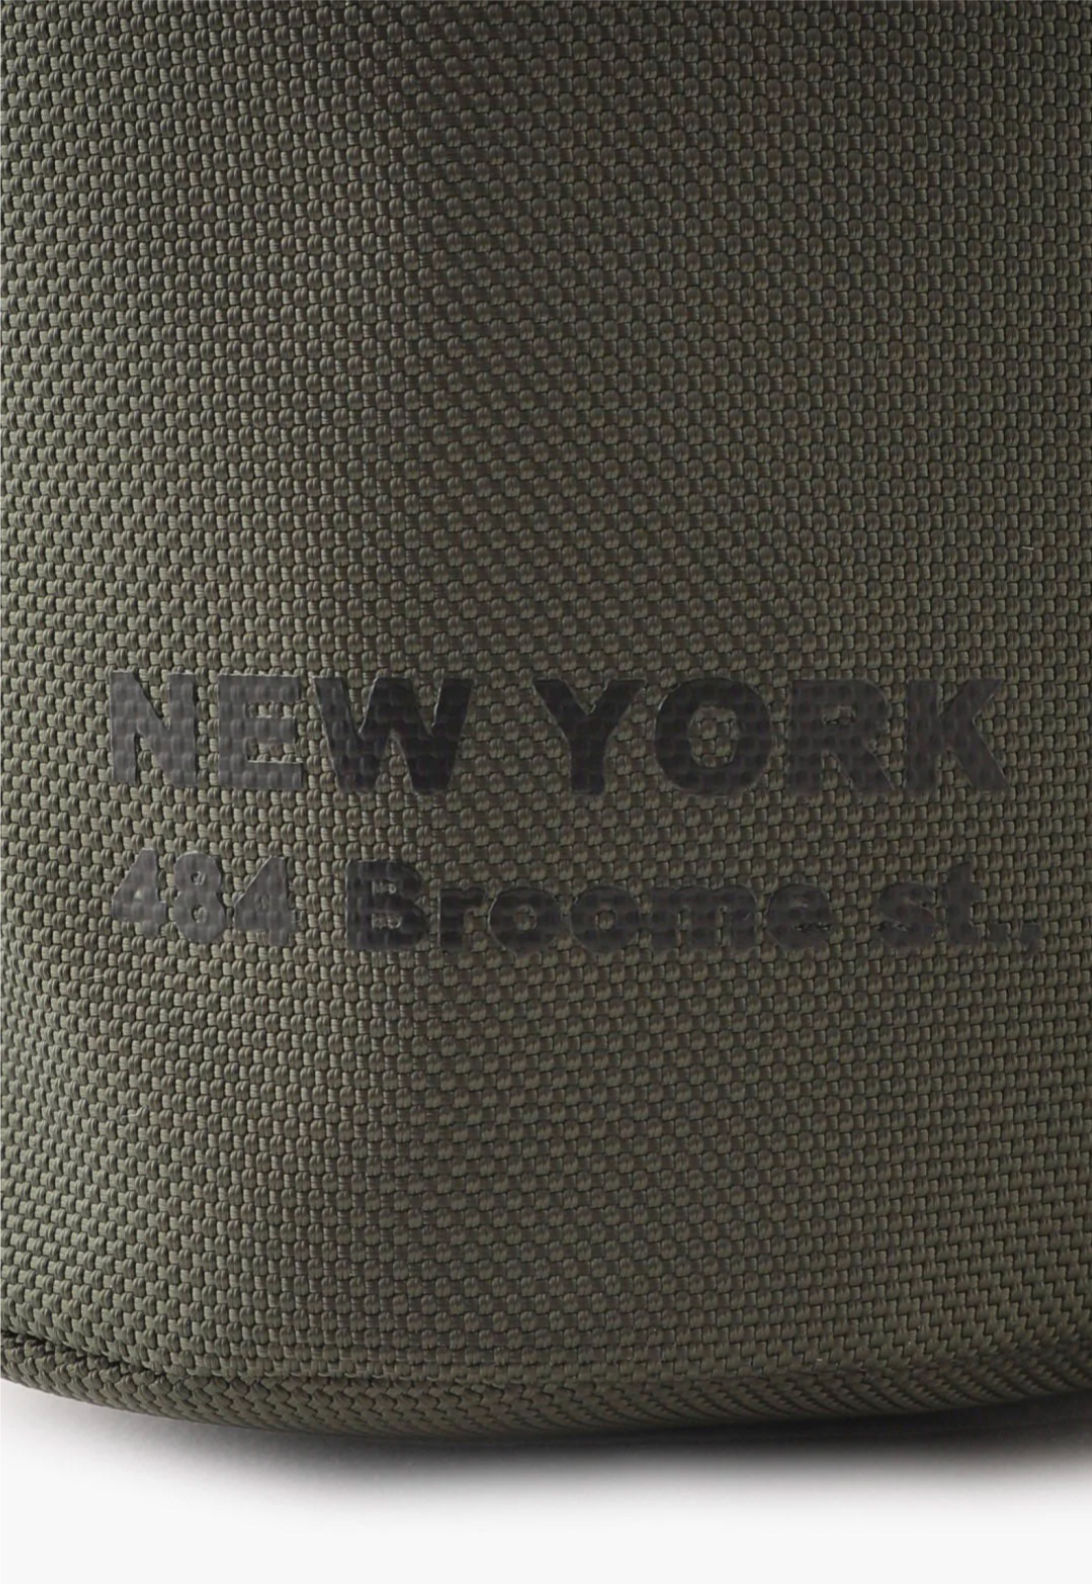 The Anyone Bucket Bag military green, on back detail of “NY 484 Broome sf.” Dark Green fonts